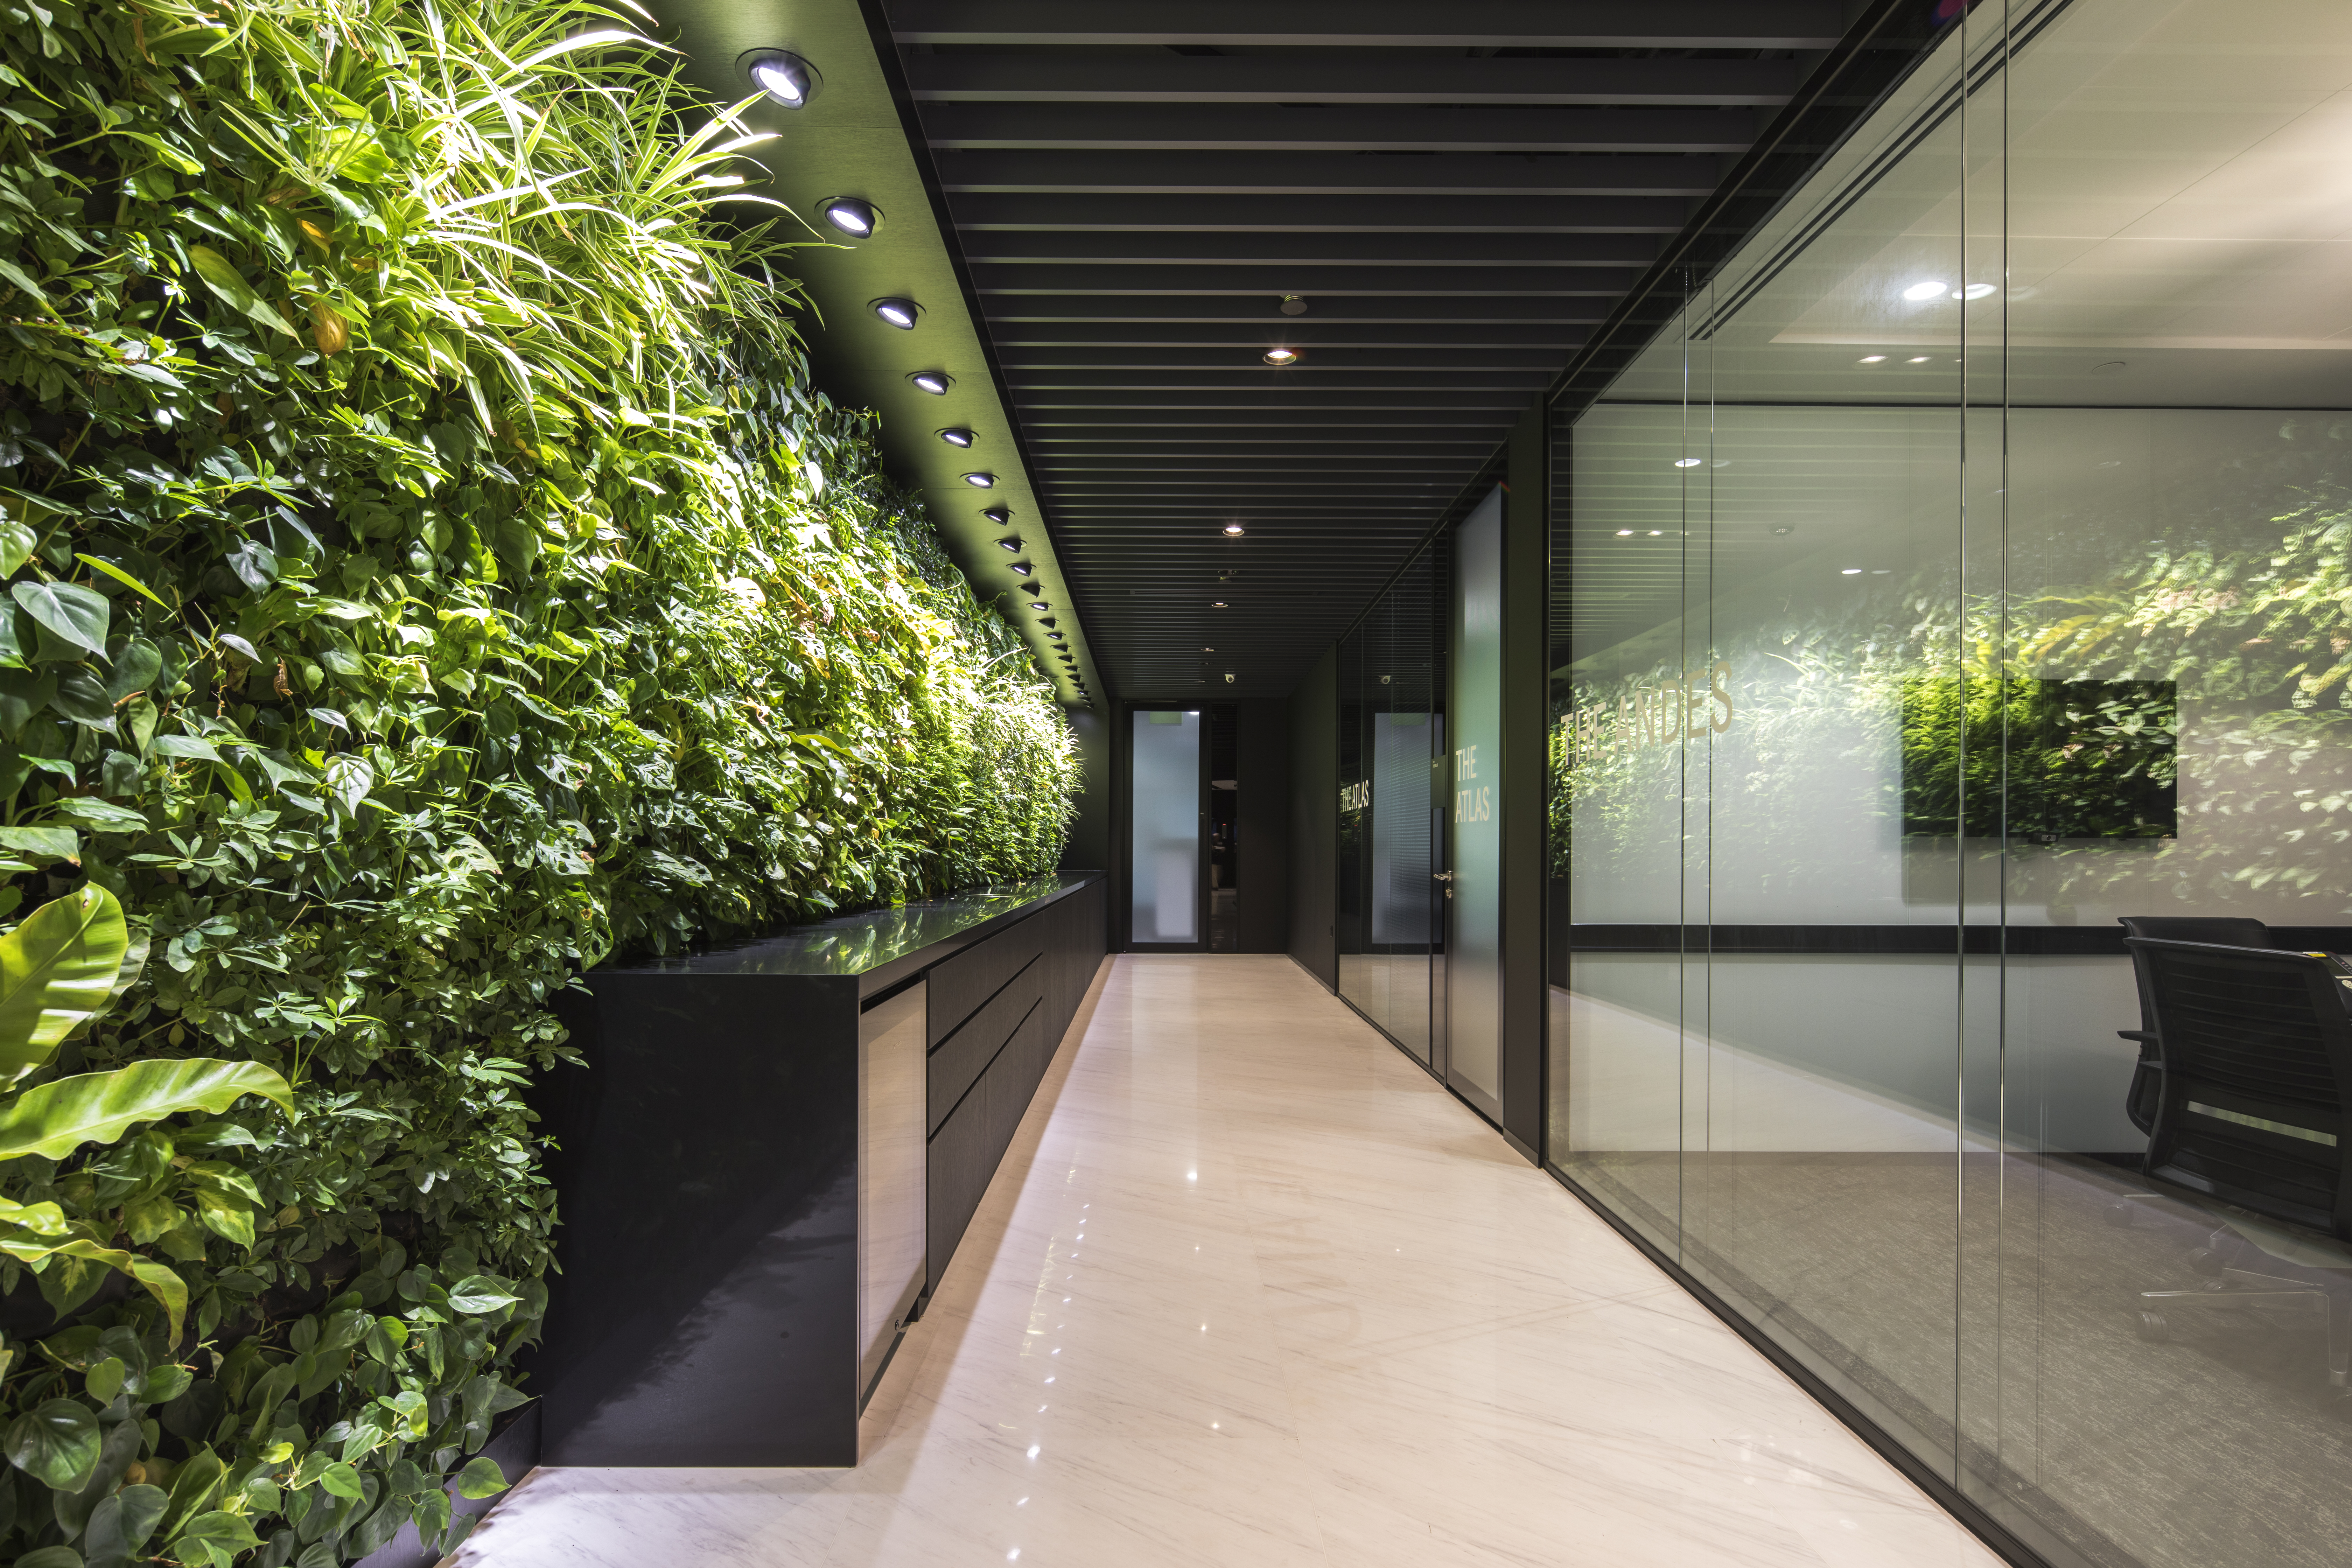 interior hallway with living plant wall